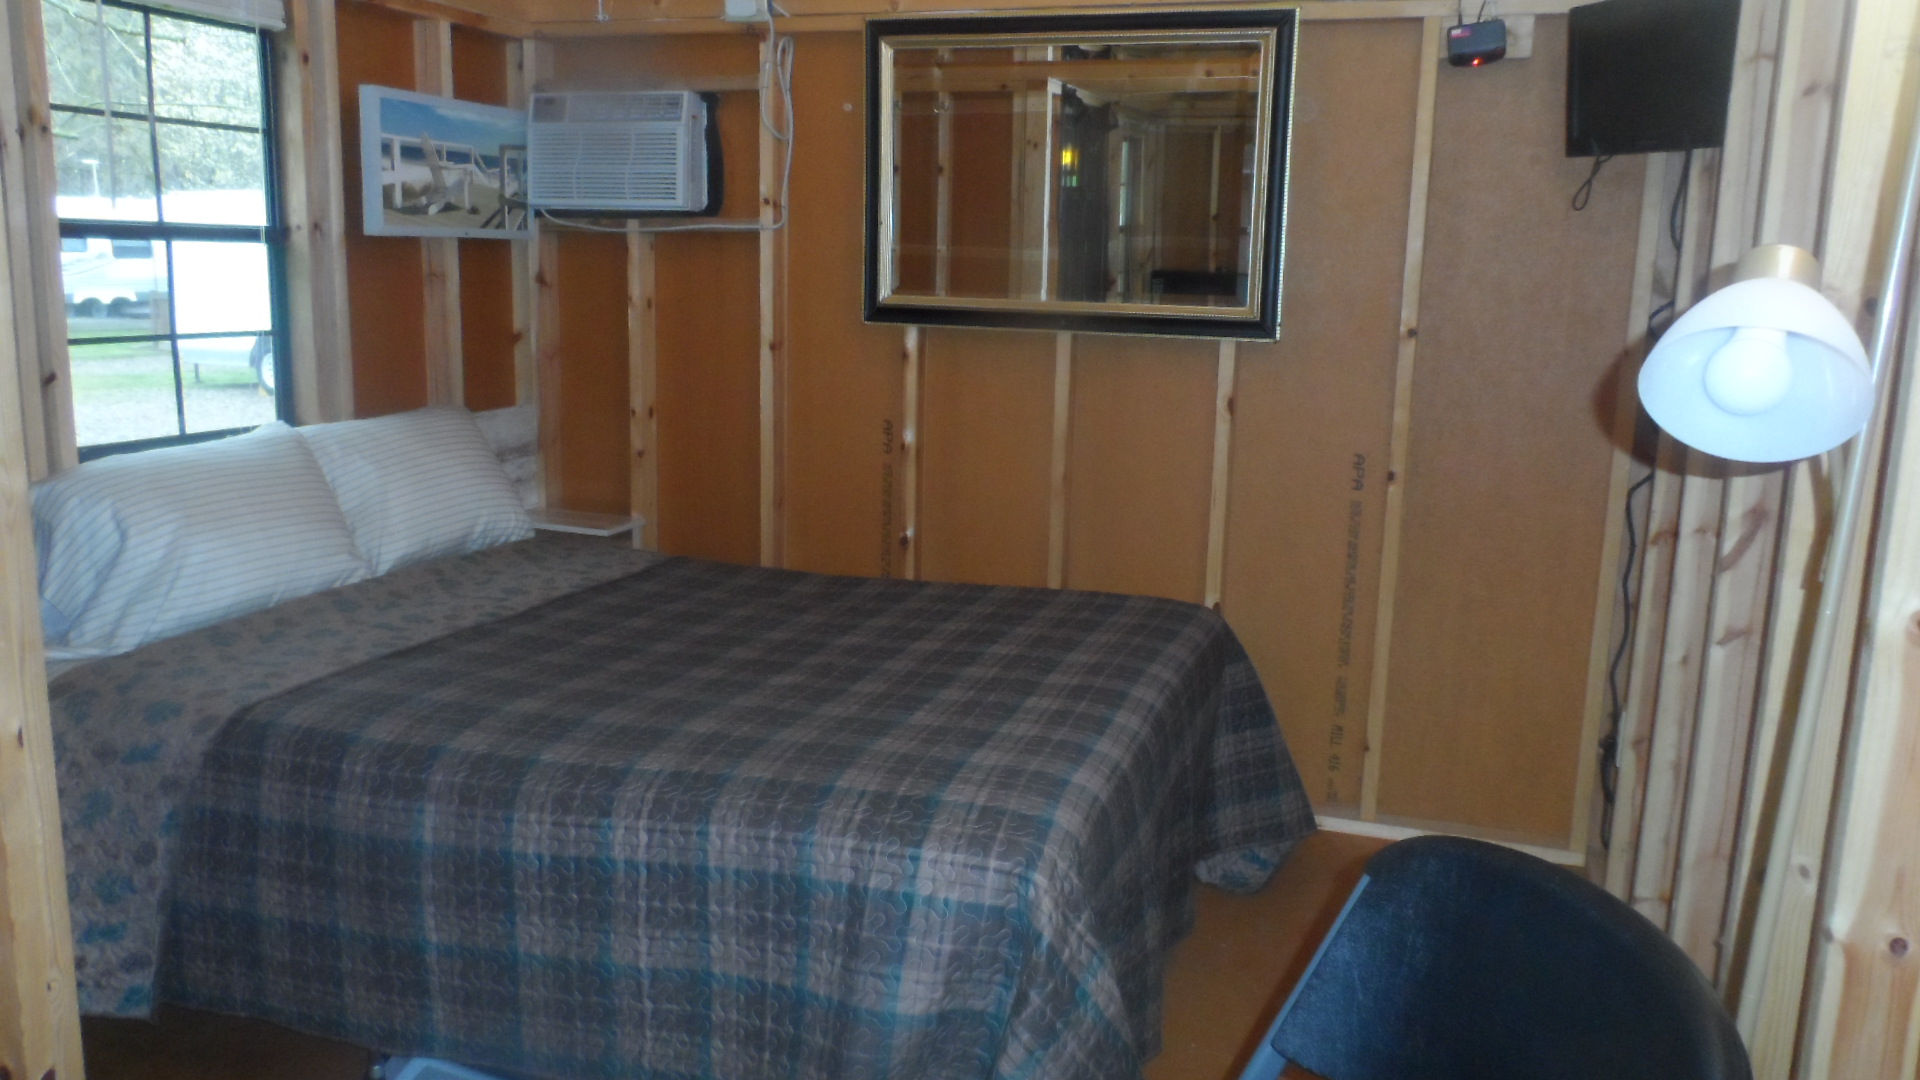 Deluxe cabin interior view of bed